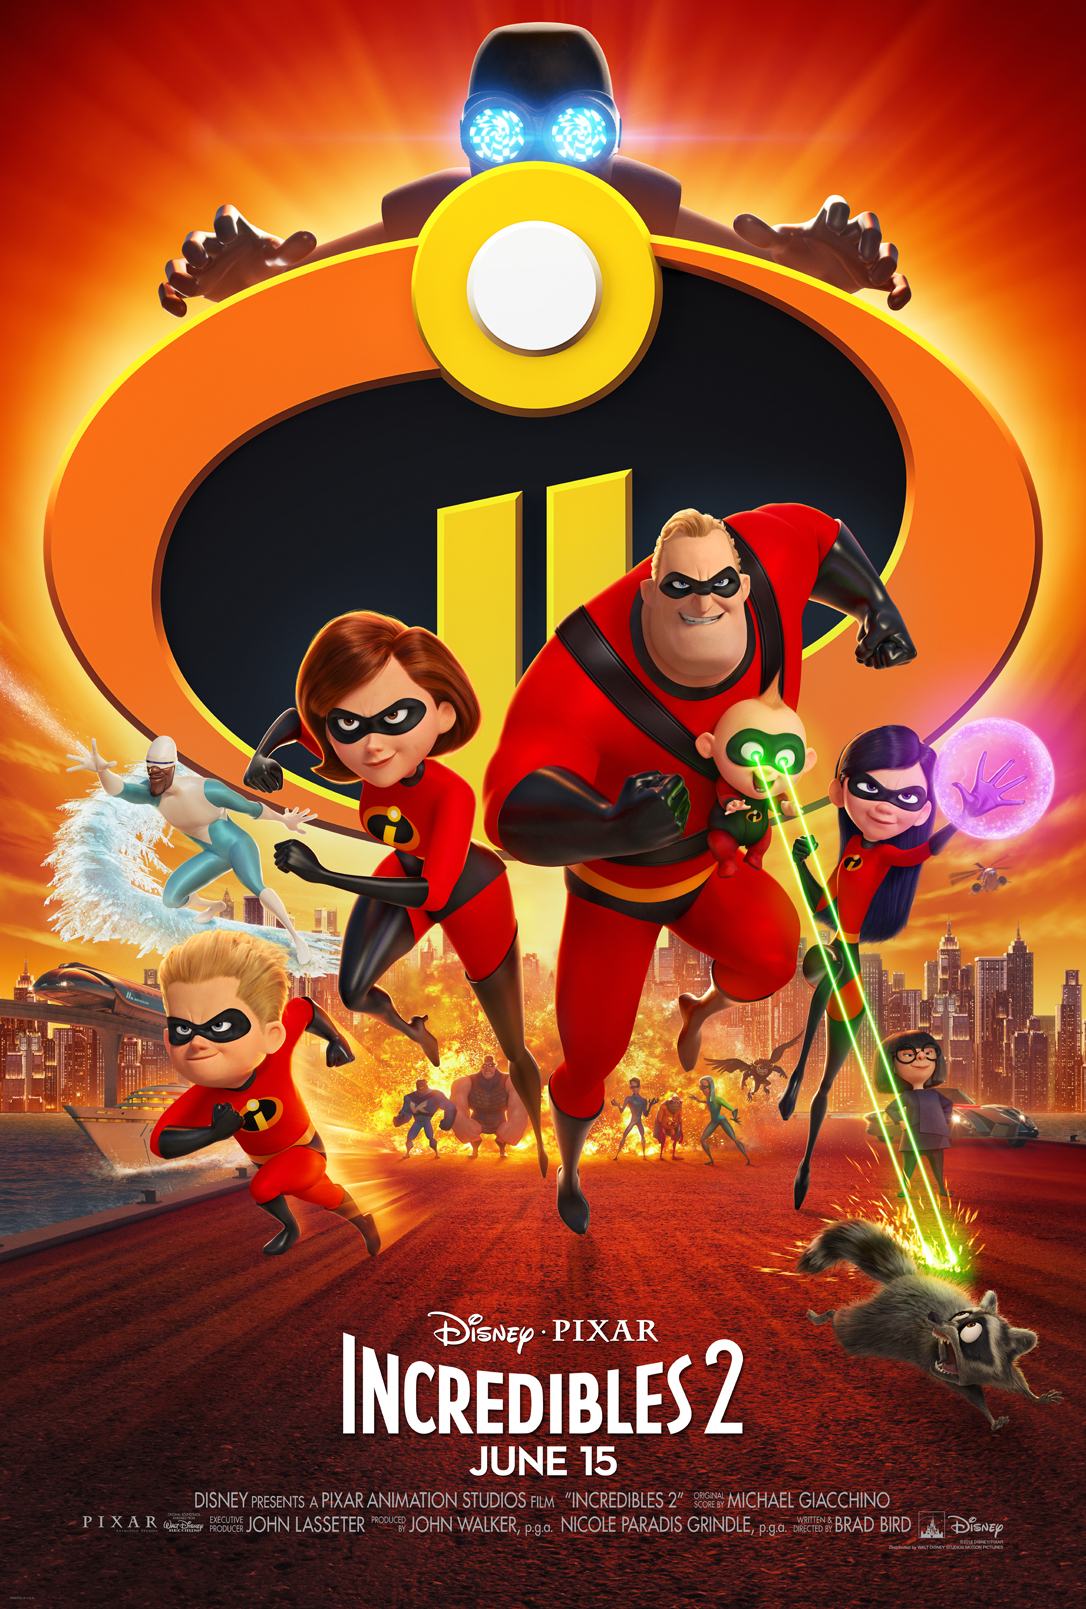 Incredibles 2 (2018) movie poster